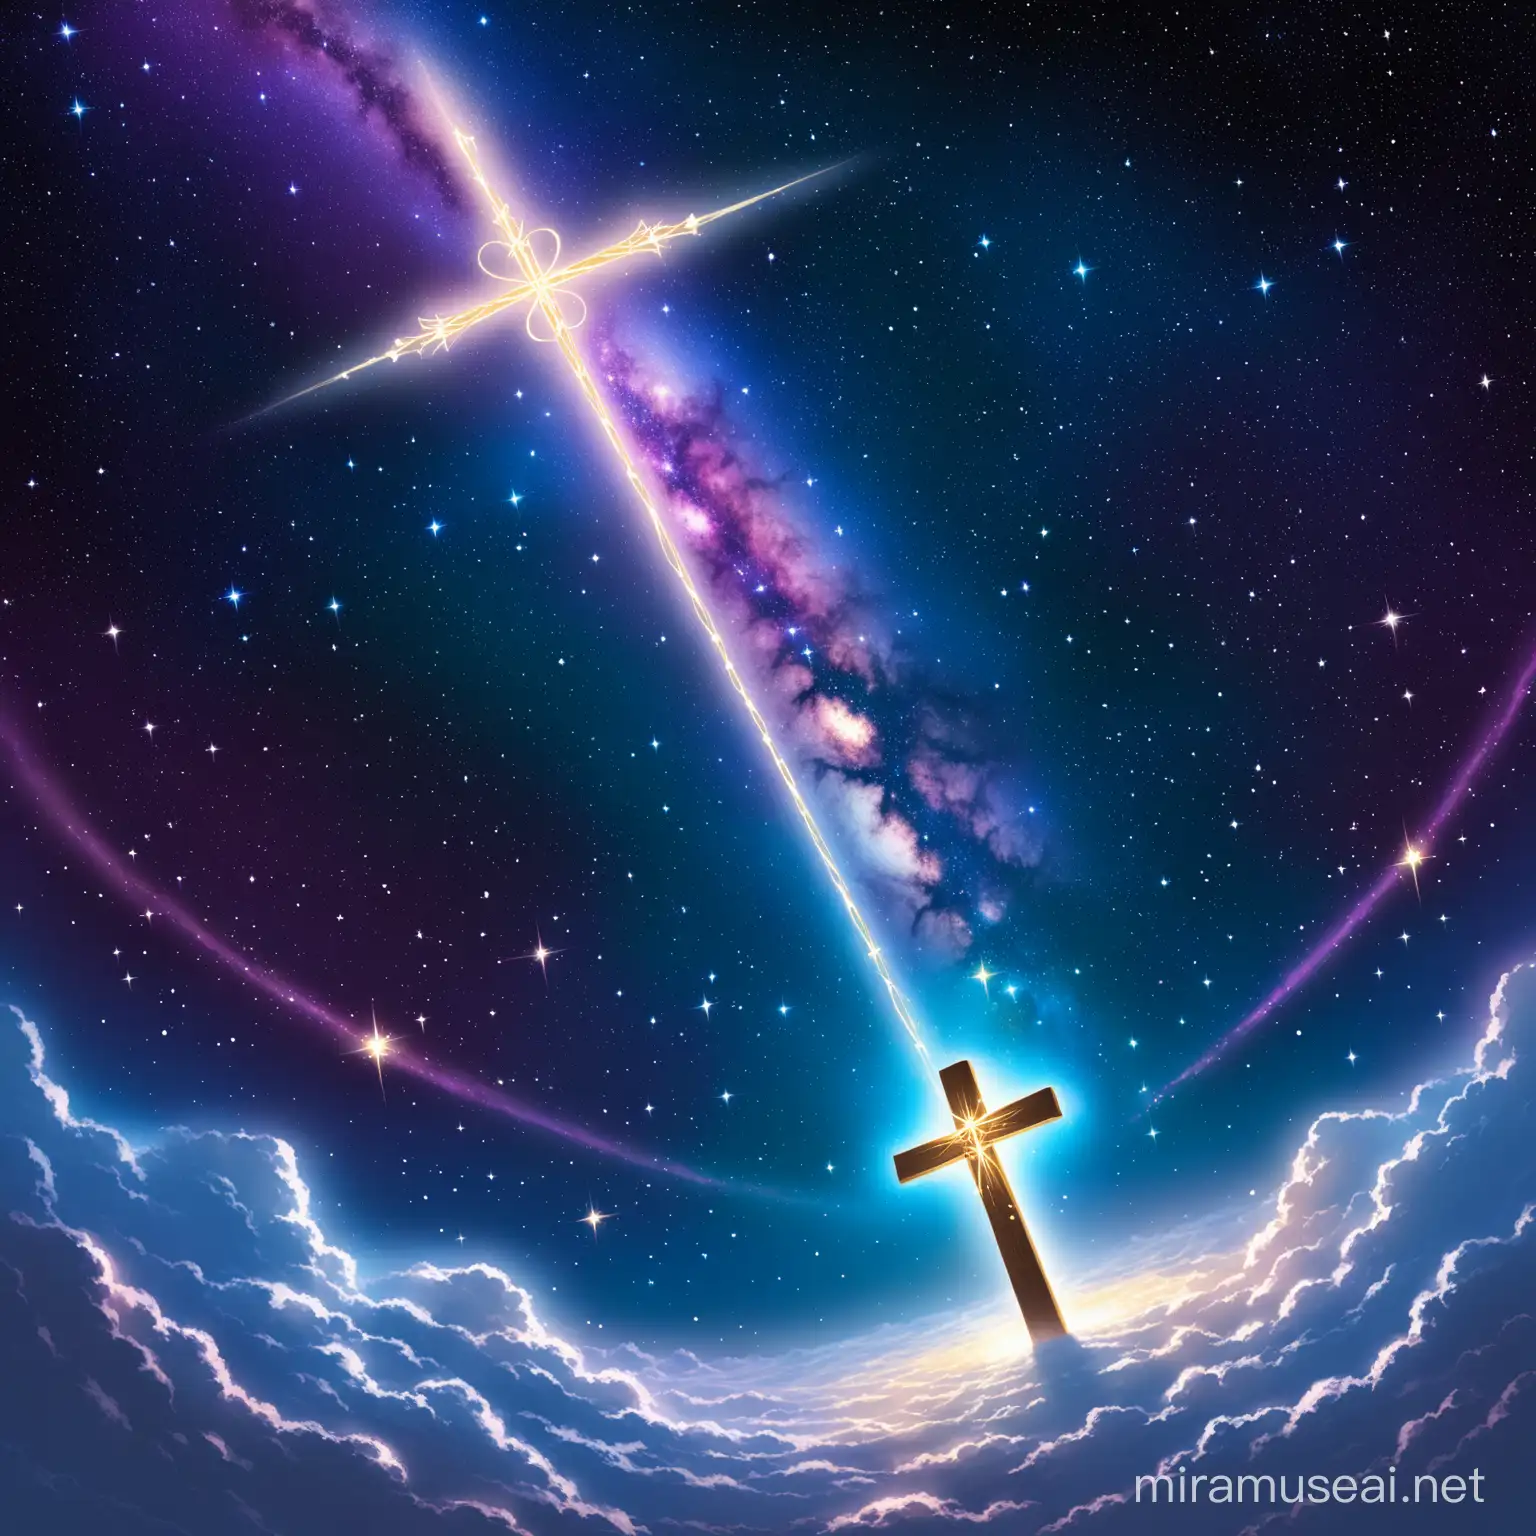 death is not the end and we go among the stars with the cross of infinite life and god will be there for us